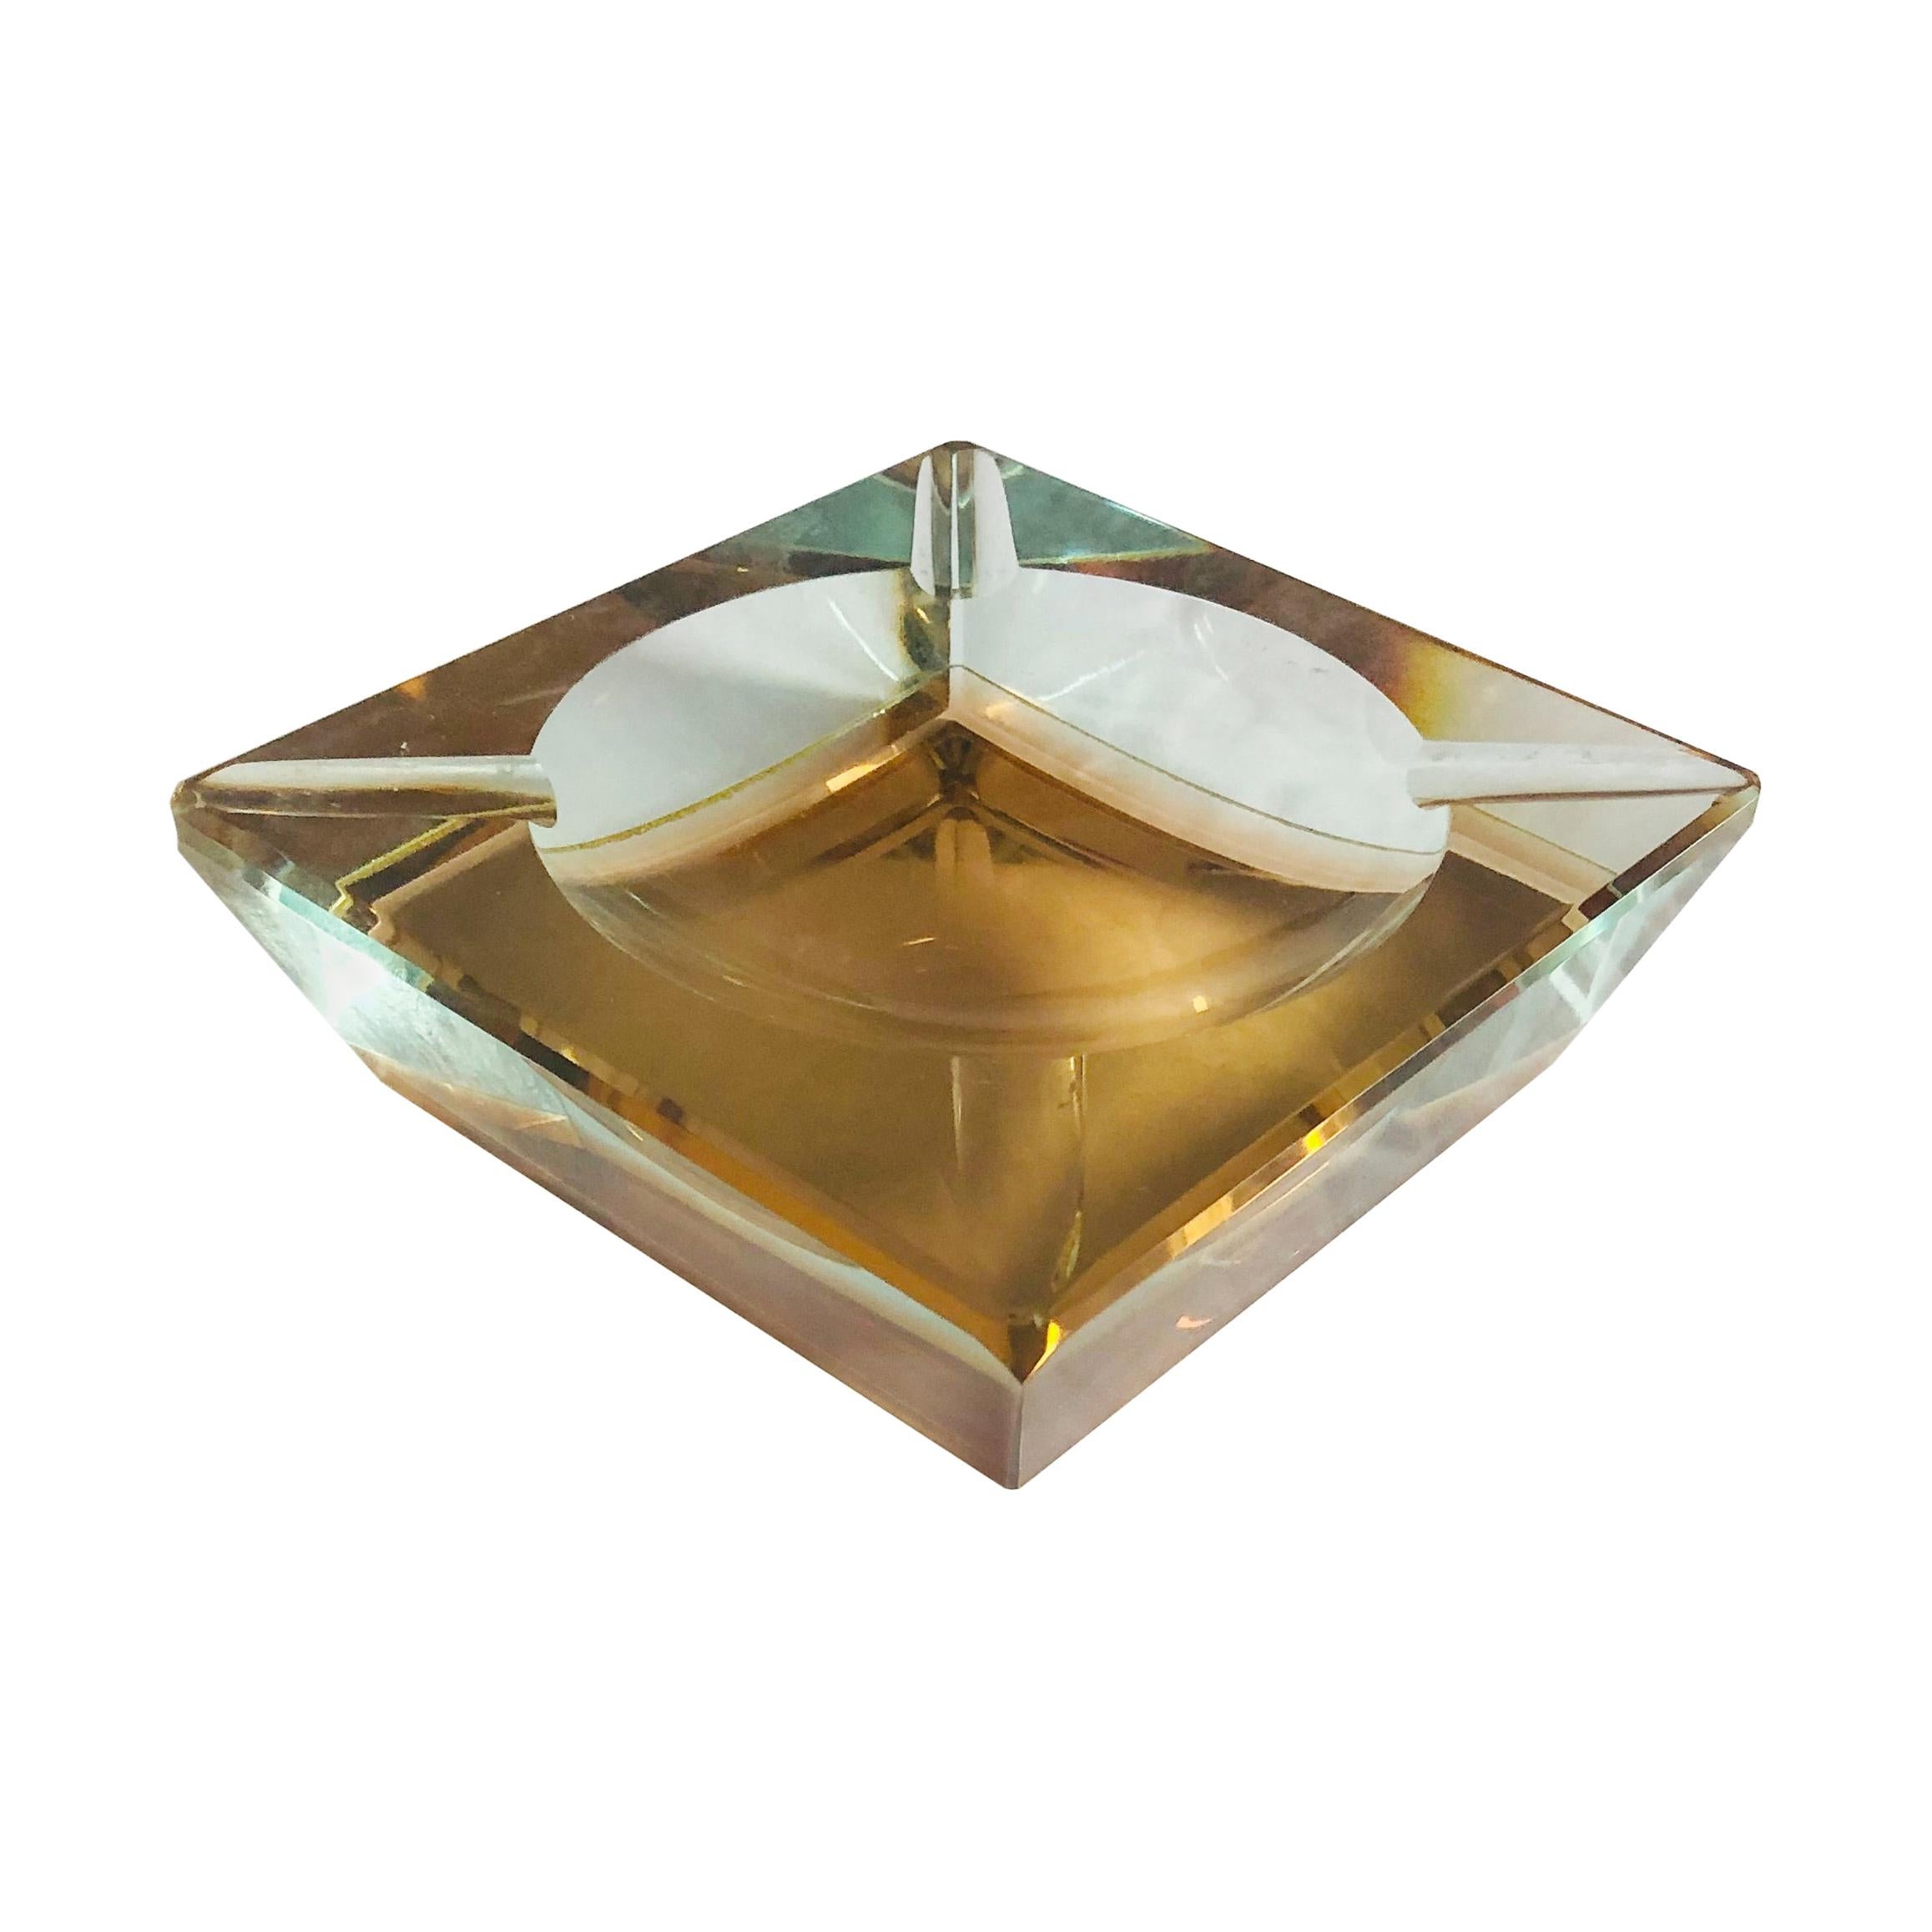 Amber Faceted Sommerso Ashtray by Mandruzzato